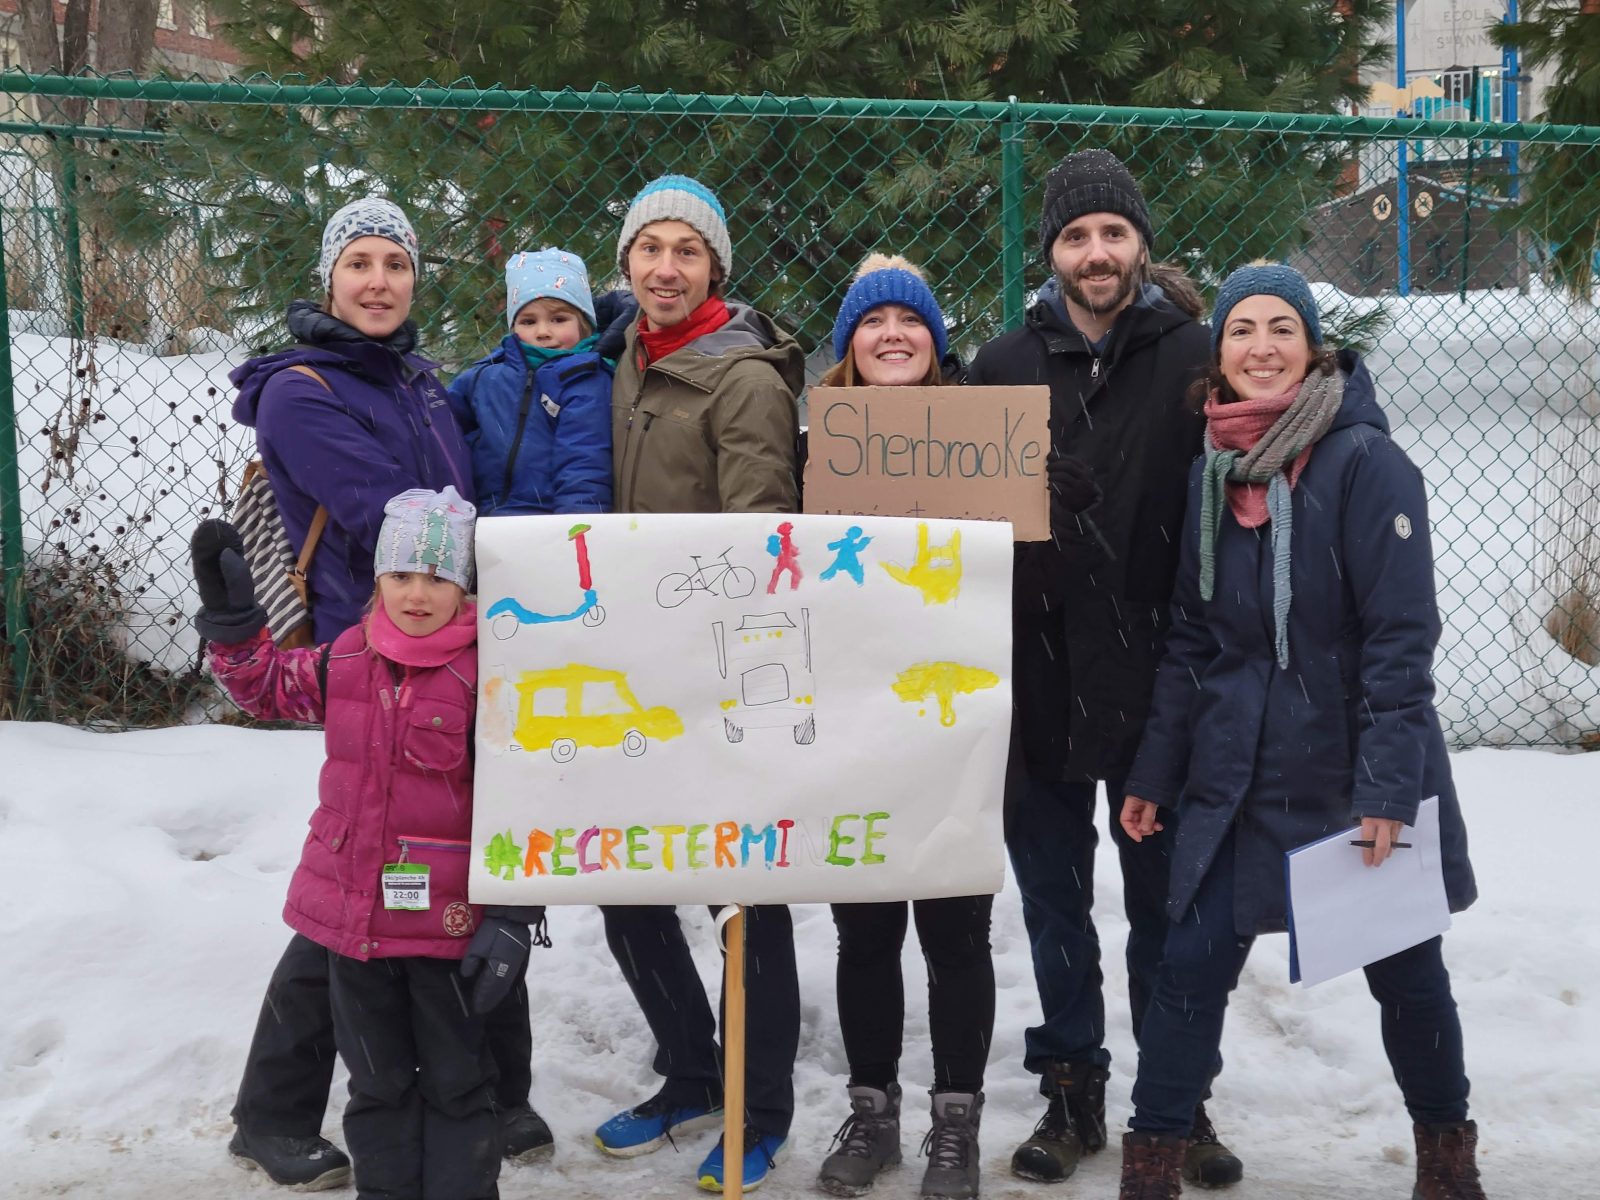 Sherbrooke parents protest for school zone safety